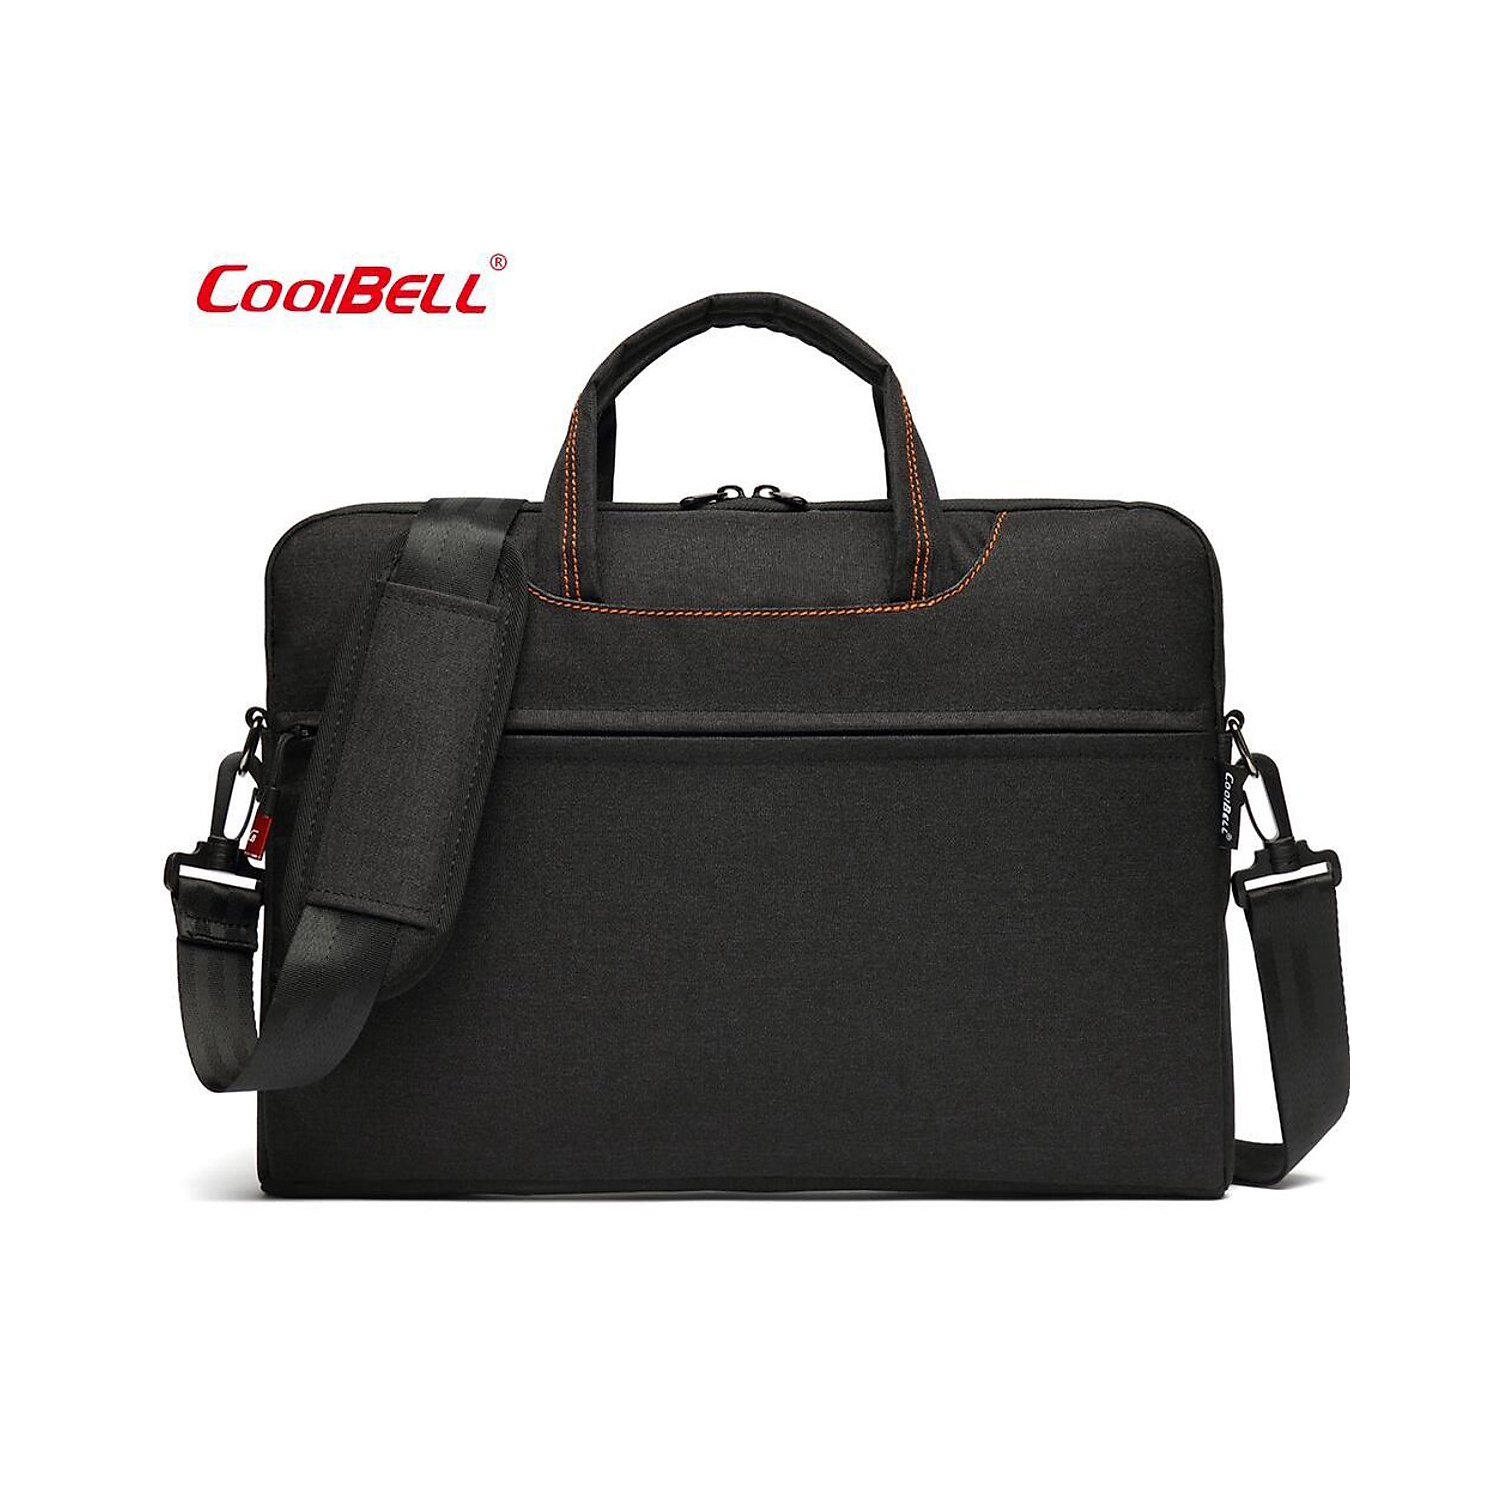 Coolbell CB-3031S Laptop Bag Price in Pakistan